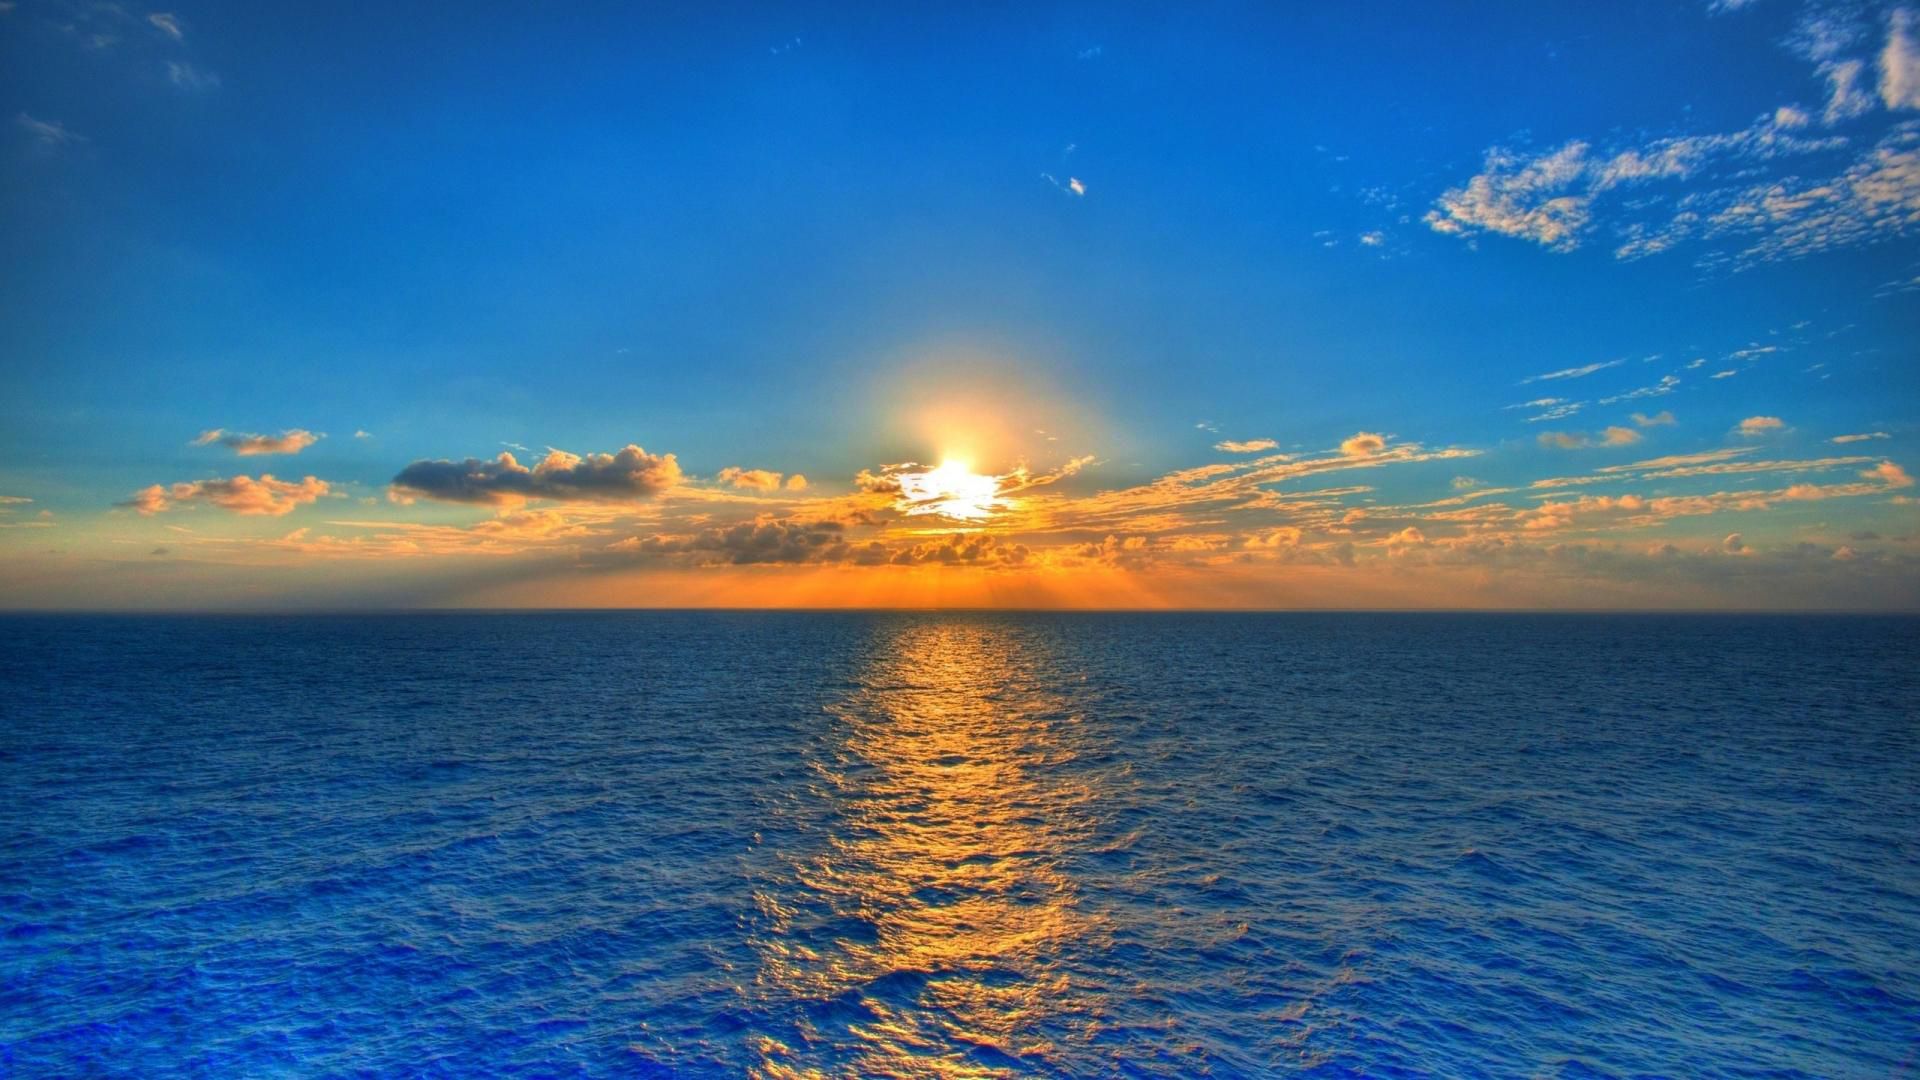 Desktop Wallpaper Sunset Over The Sea In Summer, HD Image, Picture, Background, P1haem